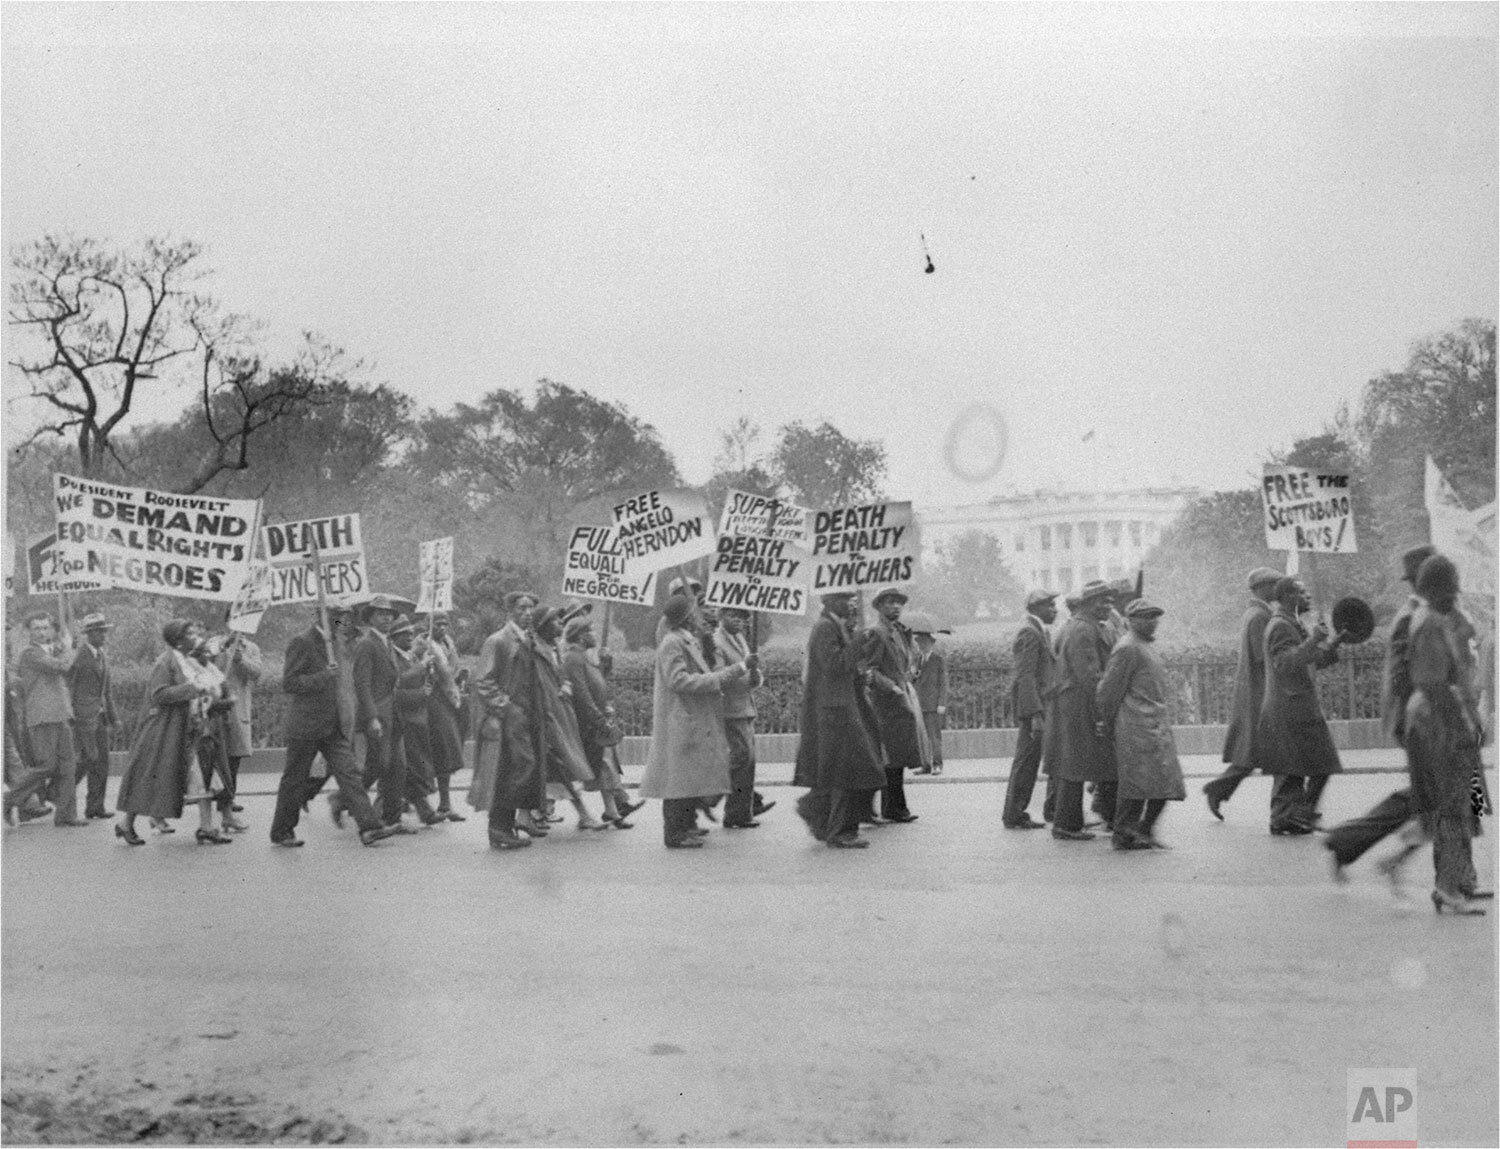  A long line of marchers paraded through the streets of Washington, DC, May 8, 1933, to the White House to present a petition to president Roosevelt asking intervention to free the youths convicted in the Scottsboro, Ala. attack case.  (AP Photo) 